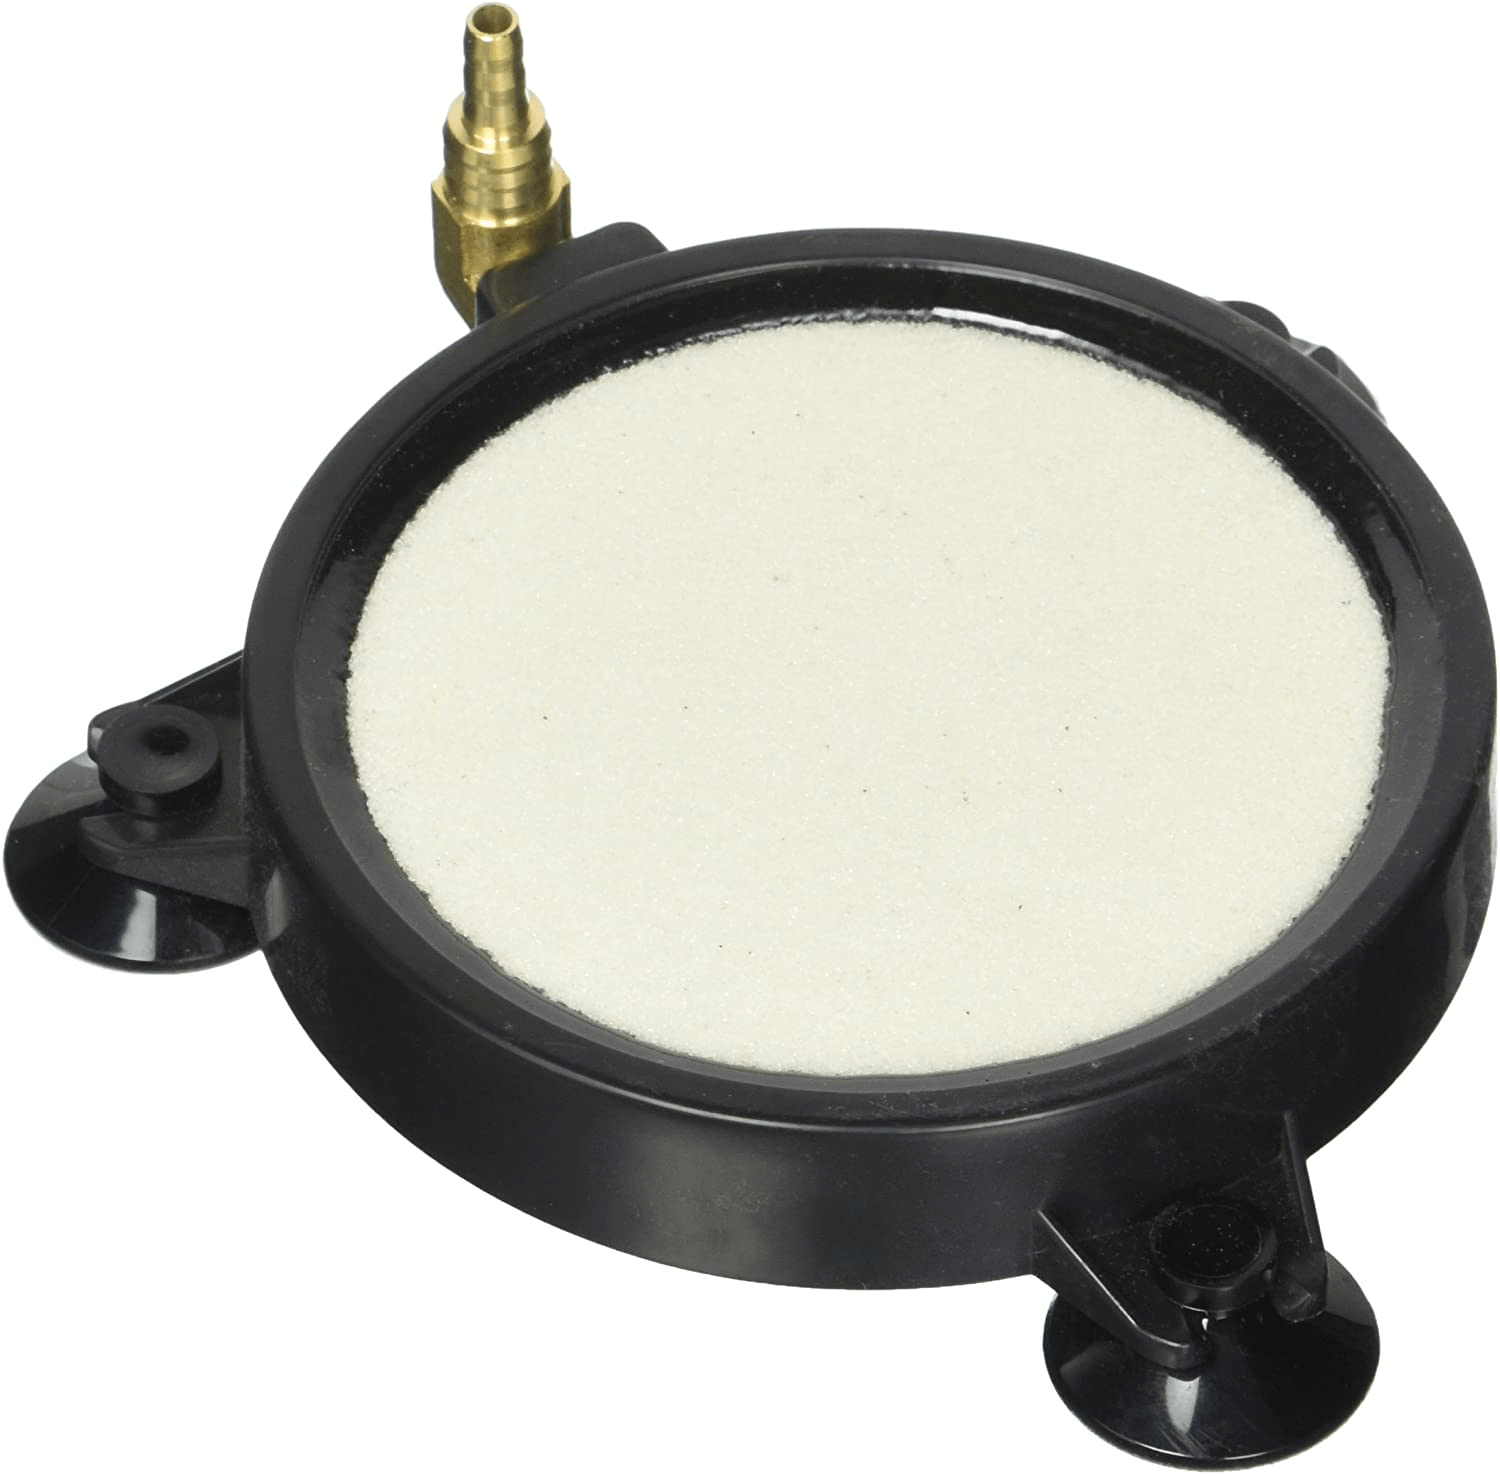 4 Inch round Air Stone Bubble Diffuser. White Premium Grade Bubbler. 3 Suction Cups to Hold in Place. 90 Degree Metal Inlet Prevents Kinks. Perfect for Hydroponics, Aquaponics, Ponds, Aquariums, Etc.